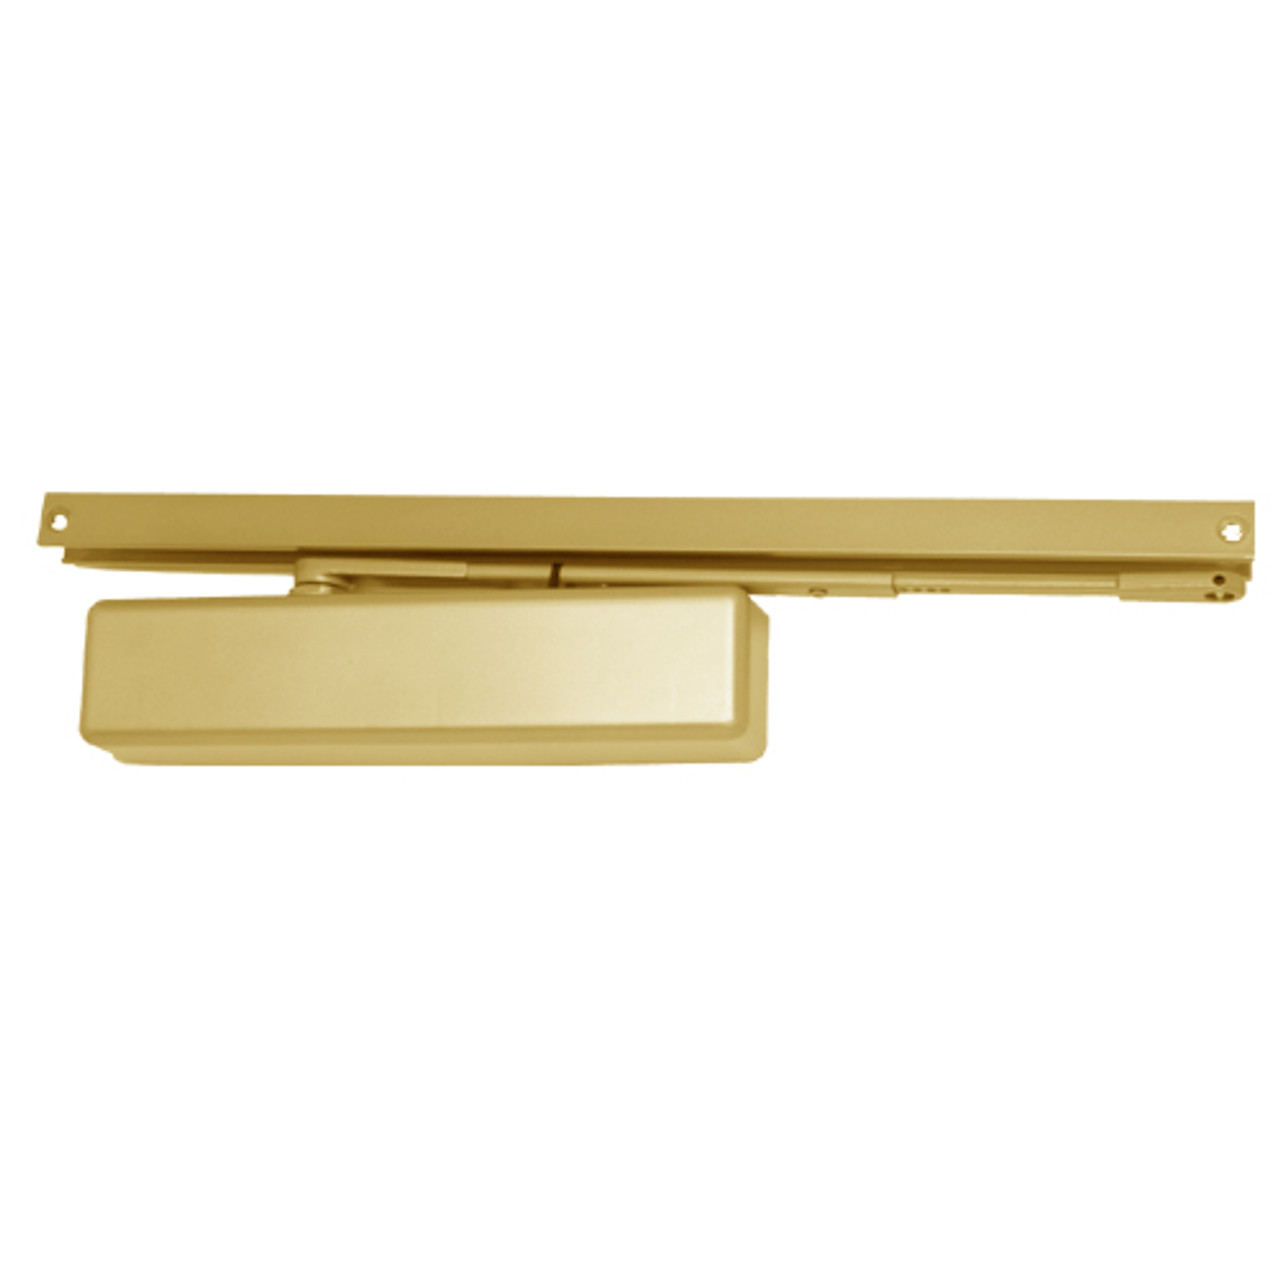 1461T-BUMPER-US3-DS LCN Surface Mount Door Closer with Bumper Arm in Bright Brass Finish